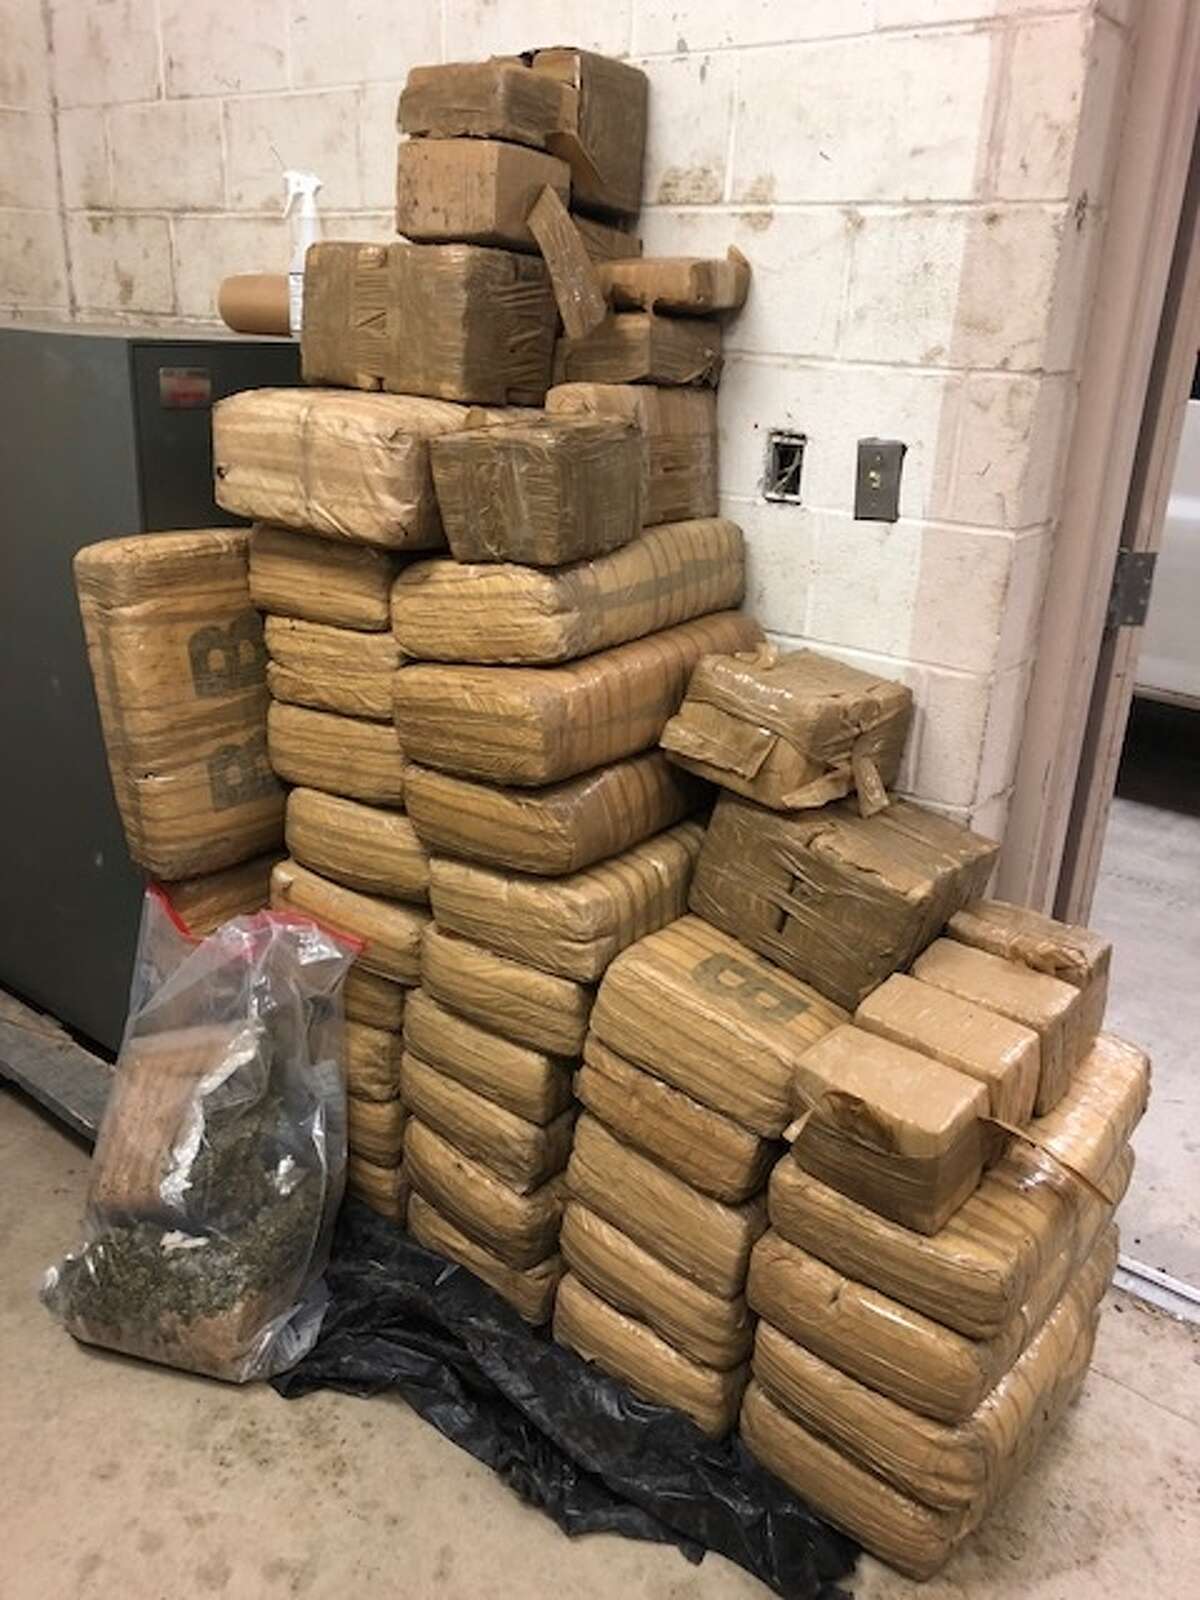 Border Patrol agents found more than $700,000 of marijuana in a SUV plunged in the Rio Grande on April 15, 2018.